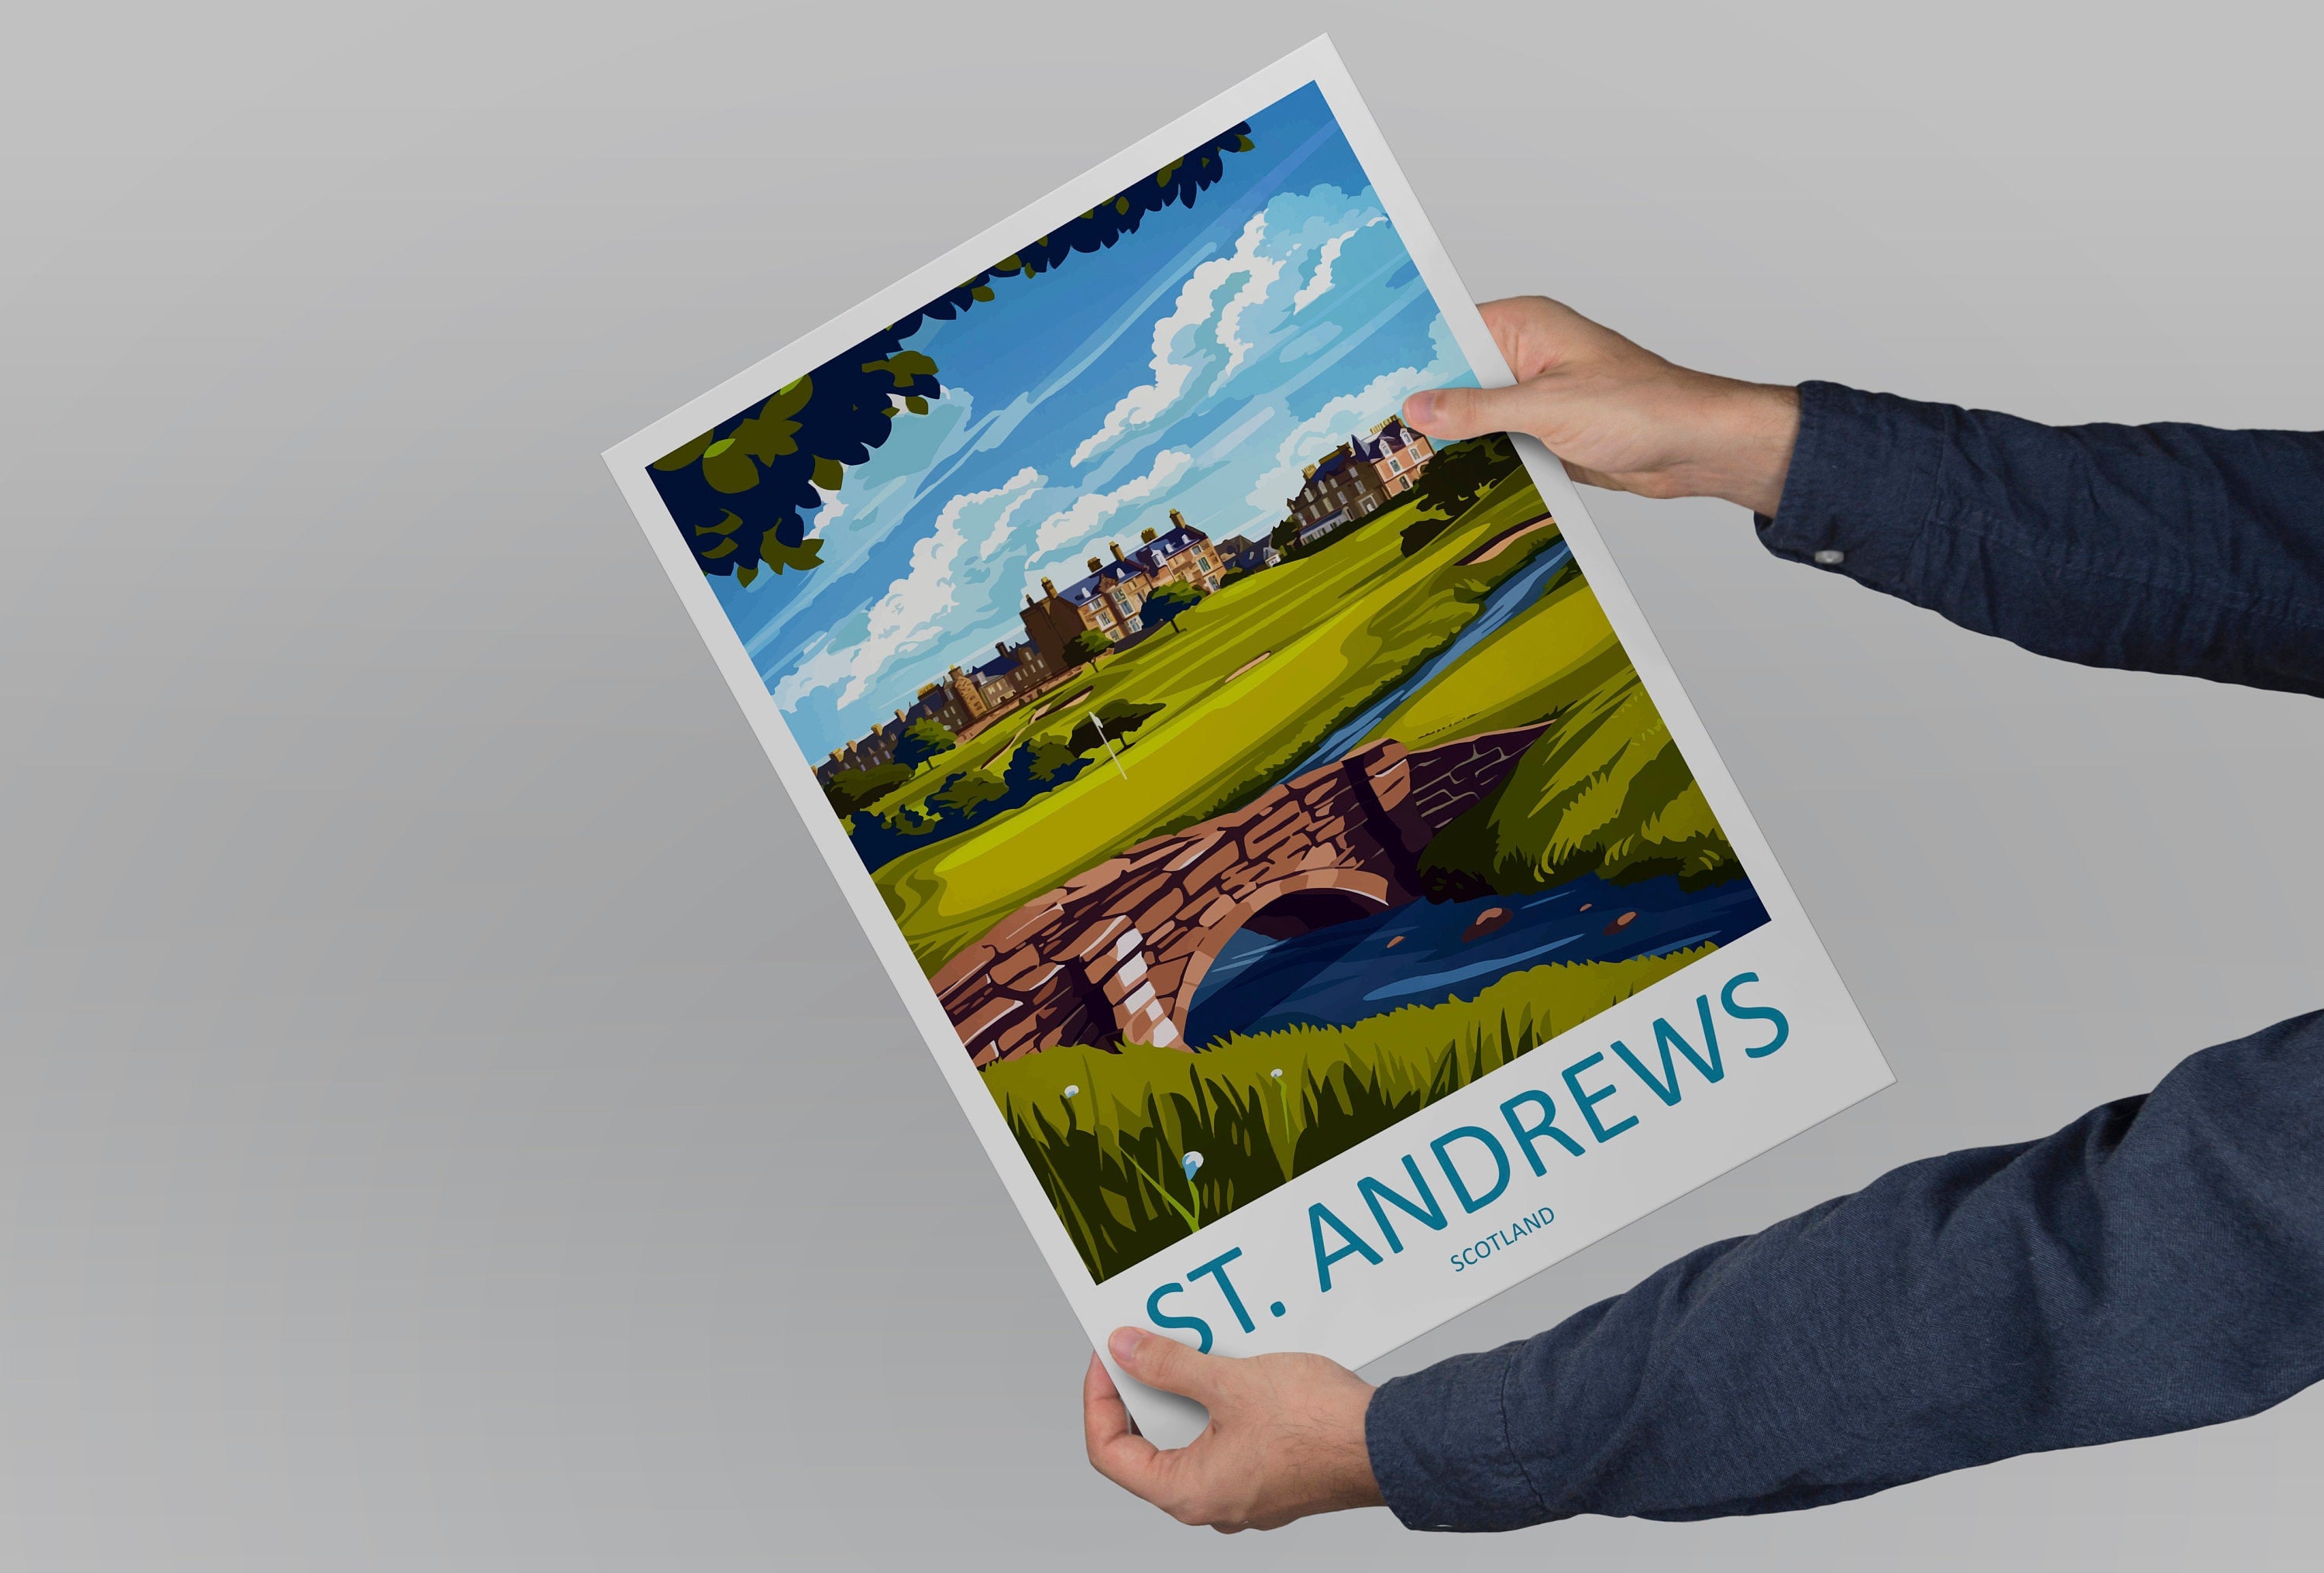 St Andrews Golf Course Travel Print Wall Art St Andrews Wall Hanging Home Décor St Andrews Gift Art Lovers Scotland Art Lover Gift St Andrew